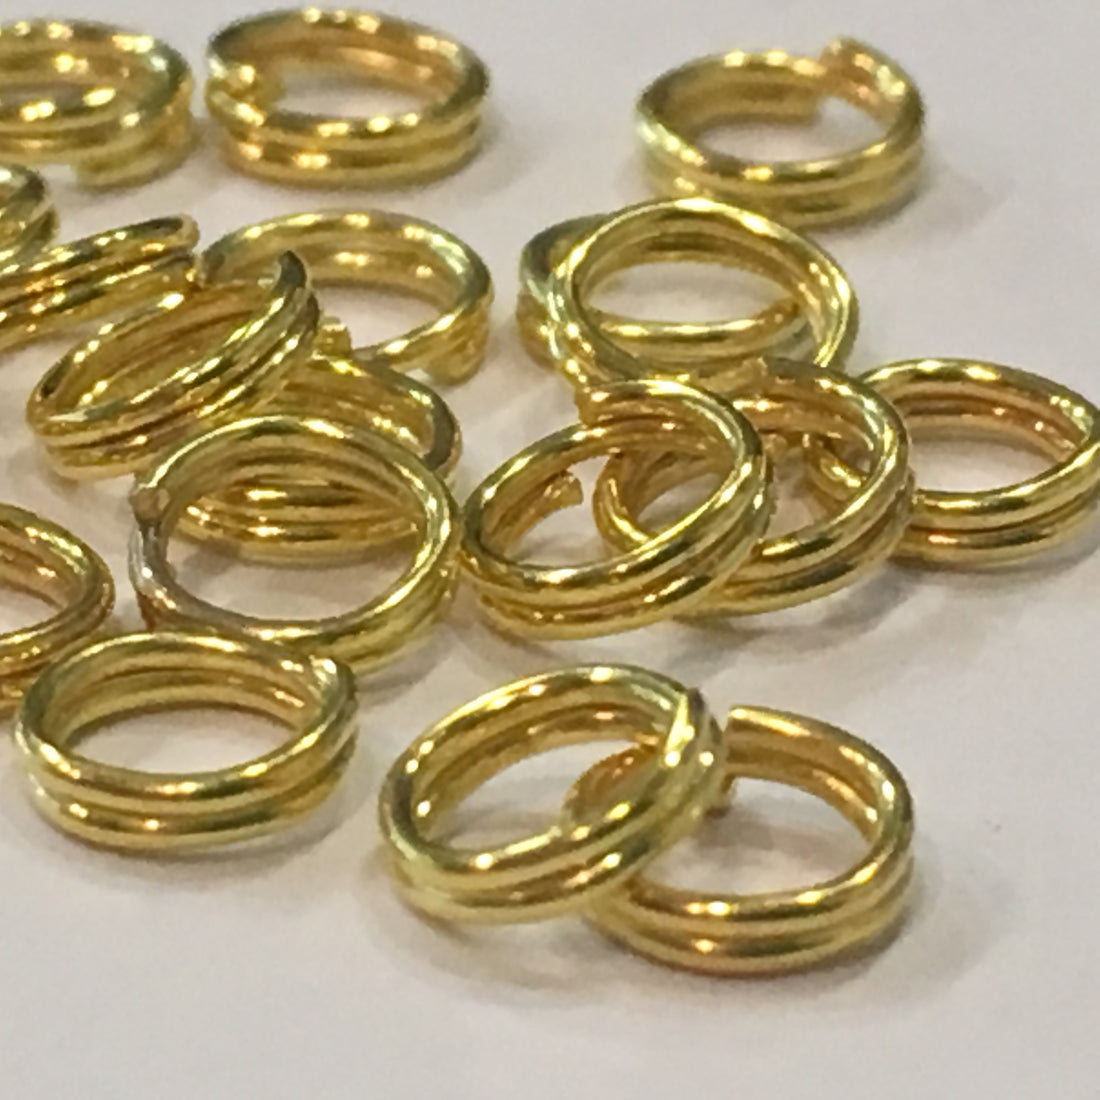 Jump Ring Sizes, Thickness and Inner Diameters